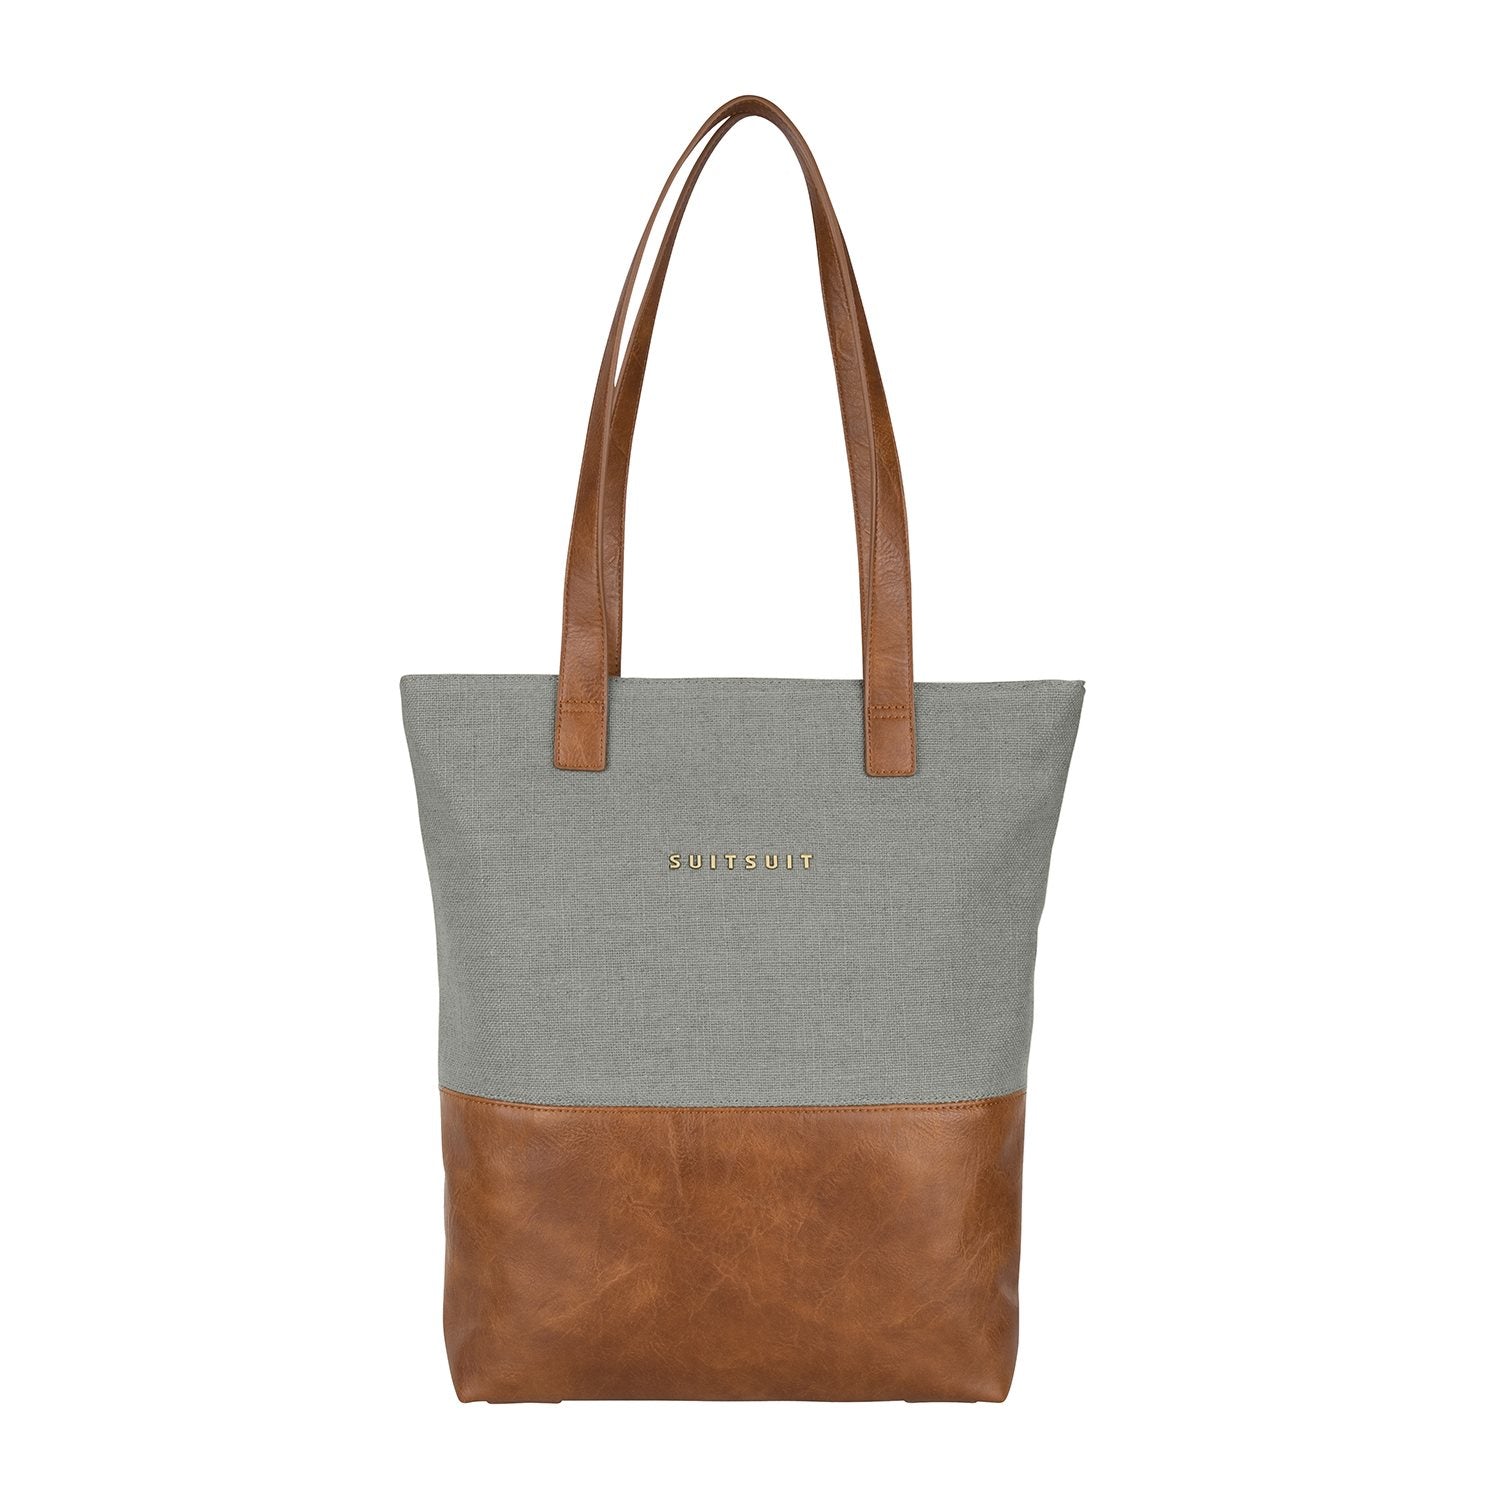 SUITSUIT - Fab Seventies - Limestone - Upright Bag